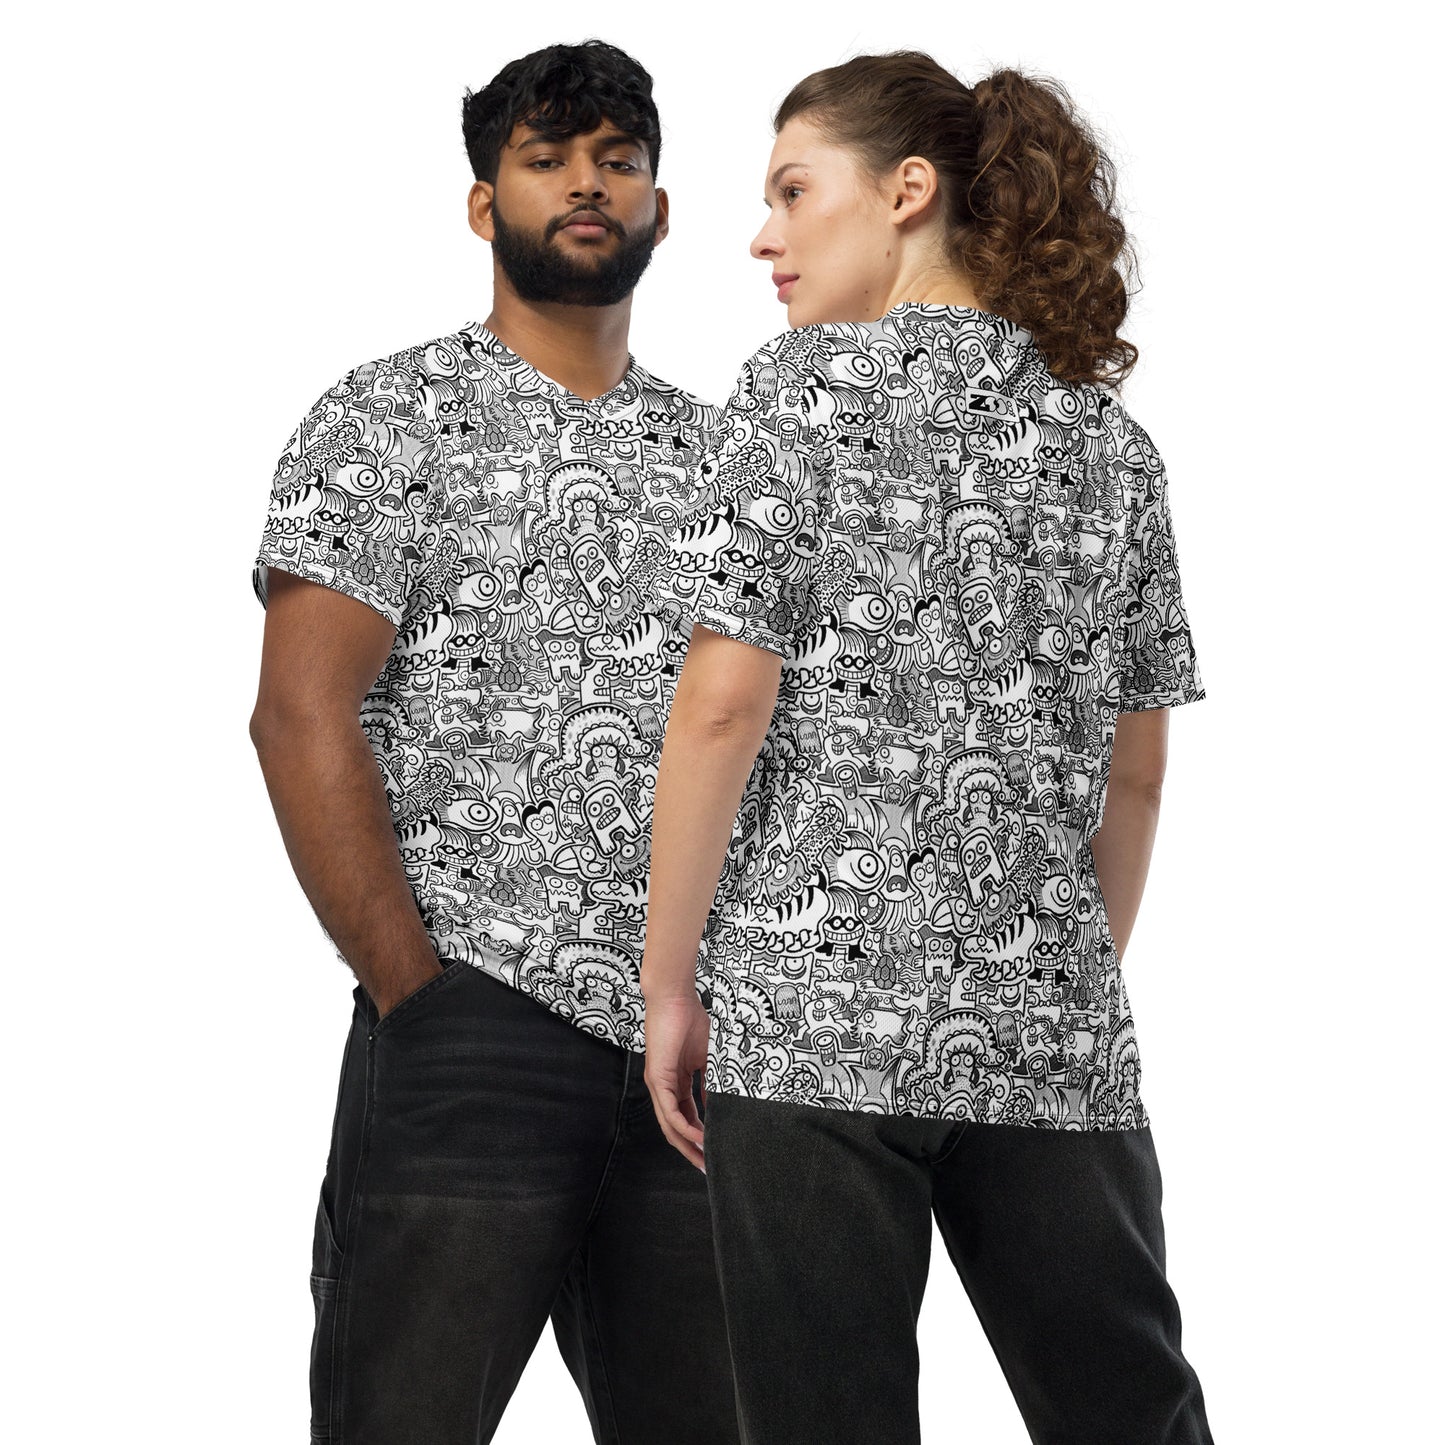 Fill your world with cool doodles Recycled unisex sports jersey. Nice couple wearing Sports jerseys by Zoo&co